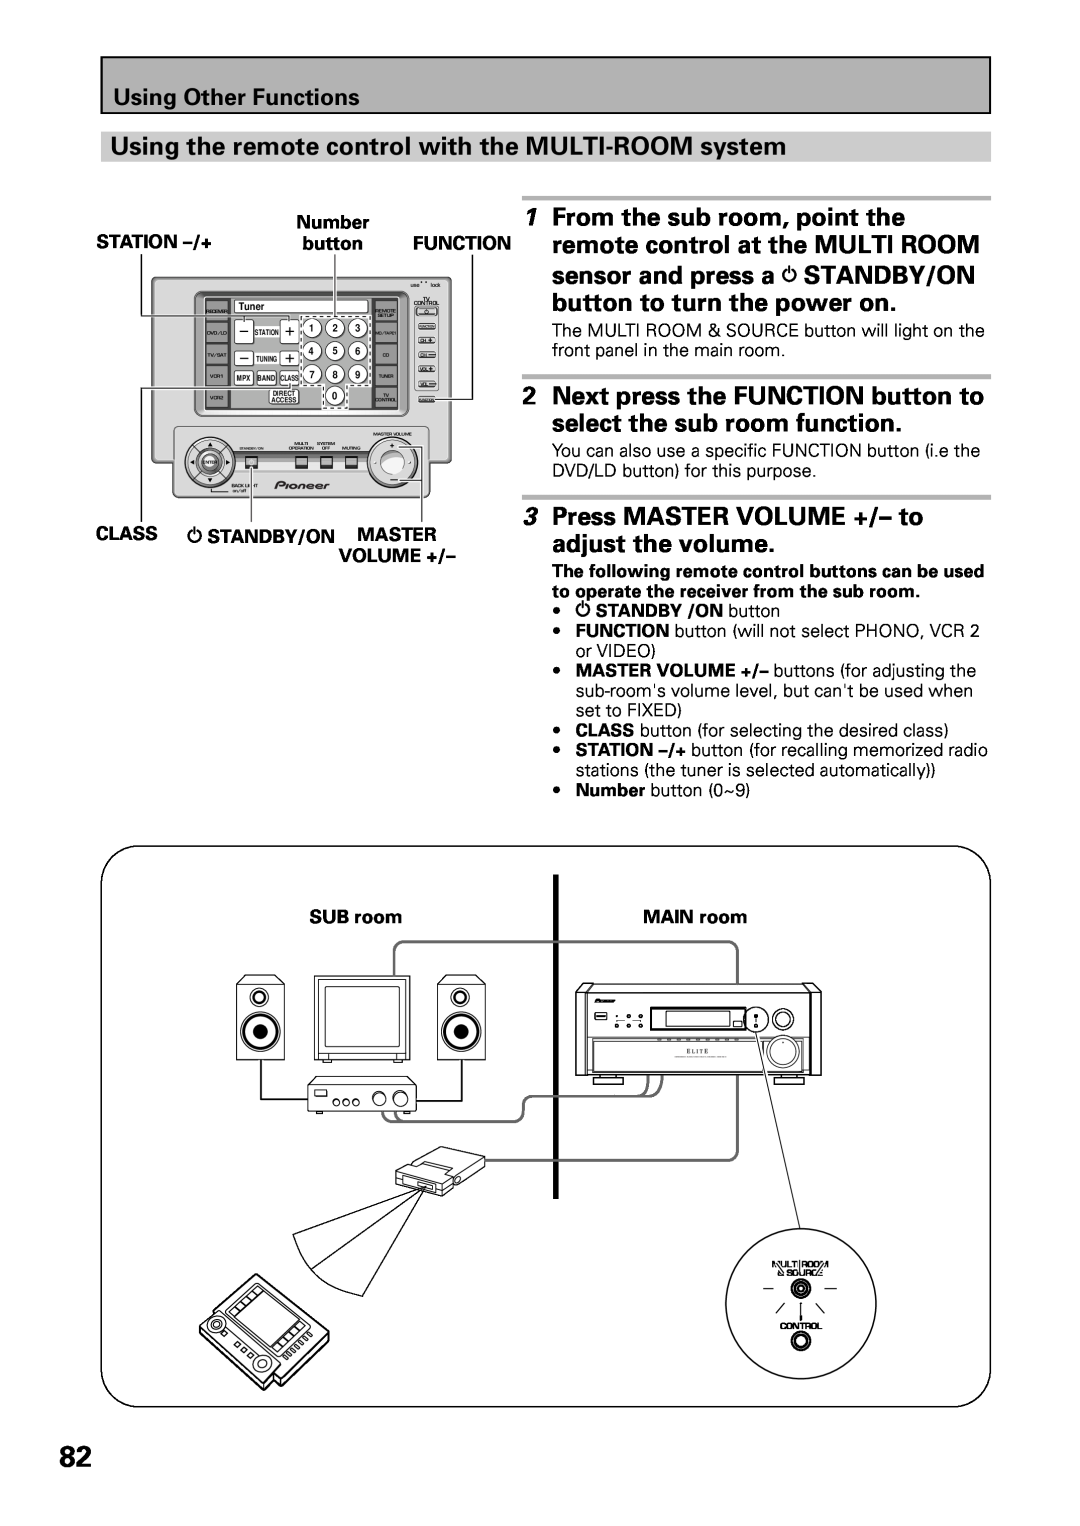 Pioneer VSX-39TX button to turn the power on, Press MASTER VOLUME +/– to, adjust the volume, Using Other Functions, Number 